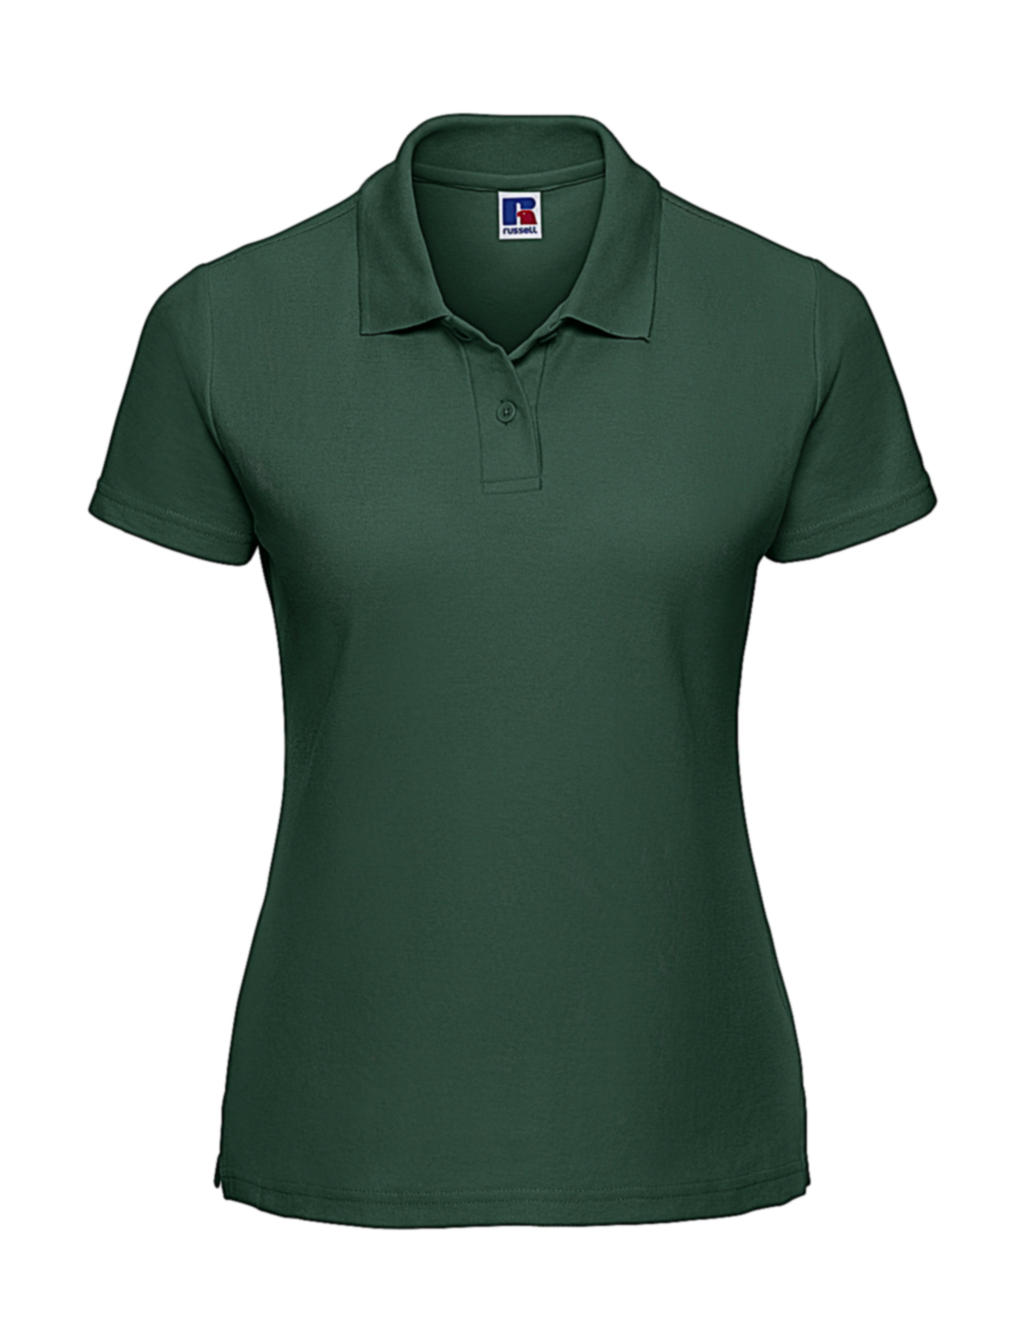  Ladies Classic Polycotton Polo in Farbe Bottle Green